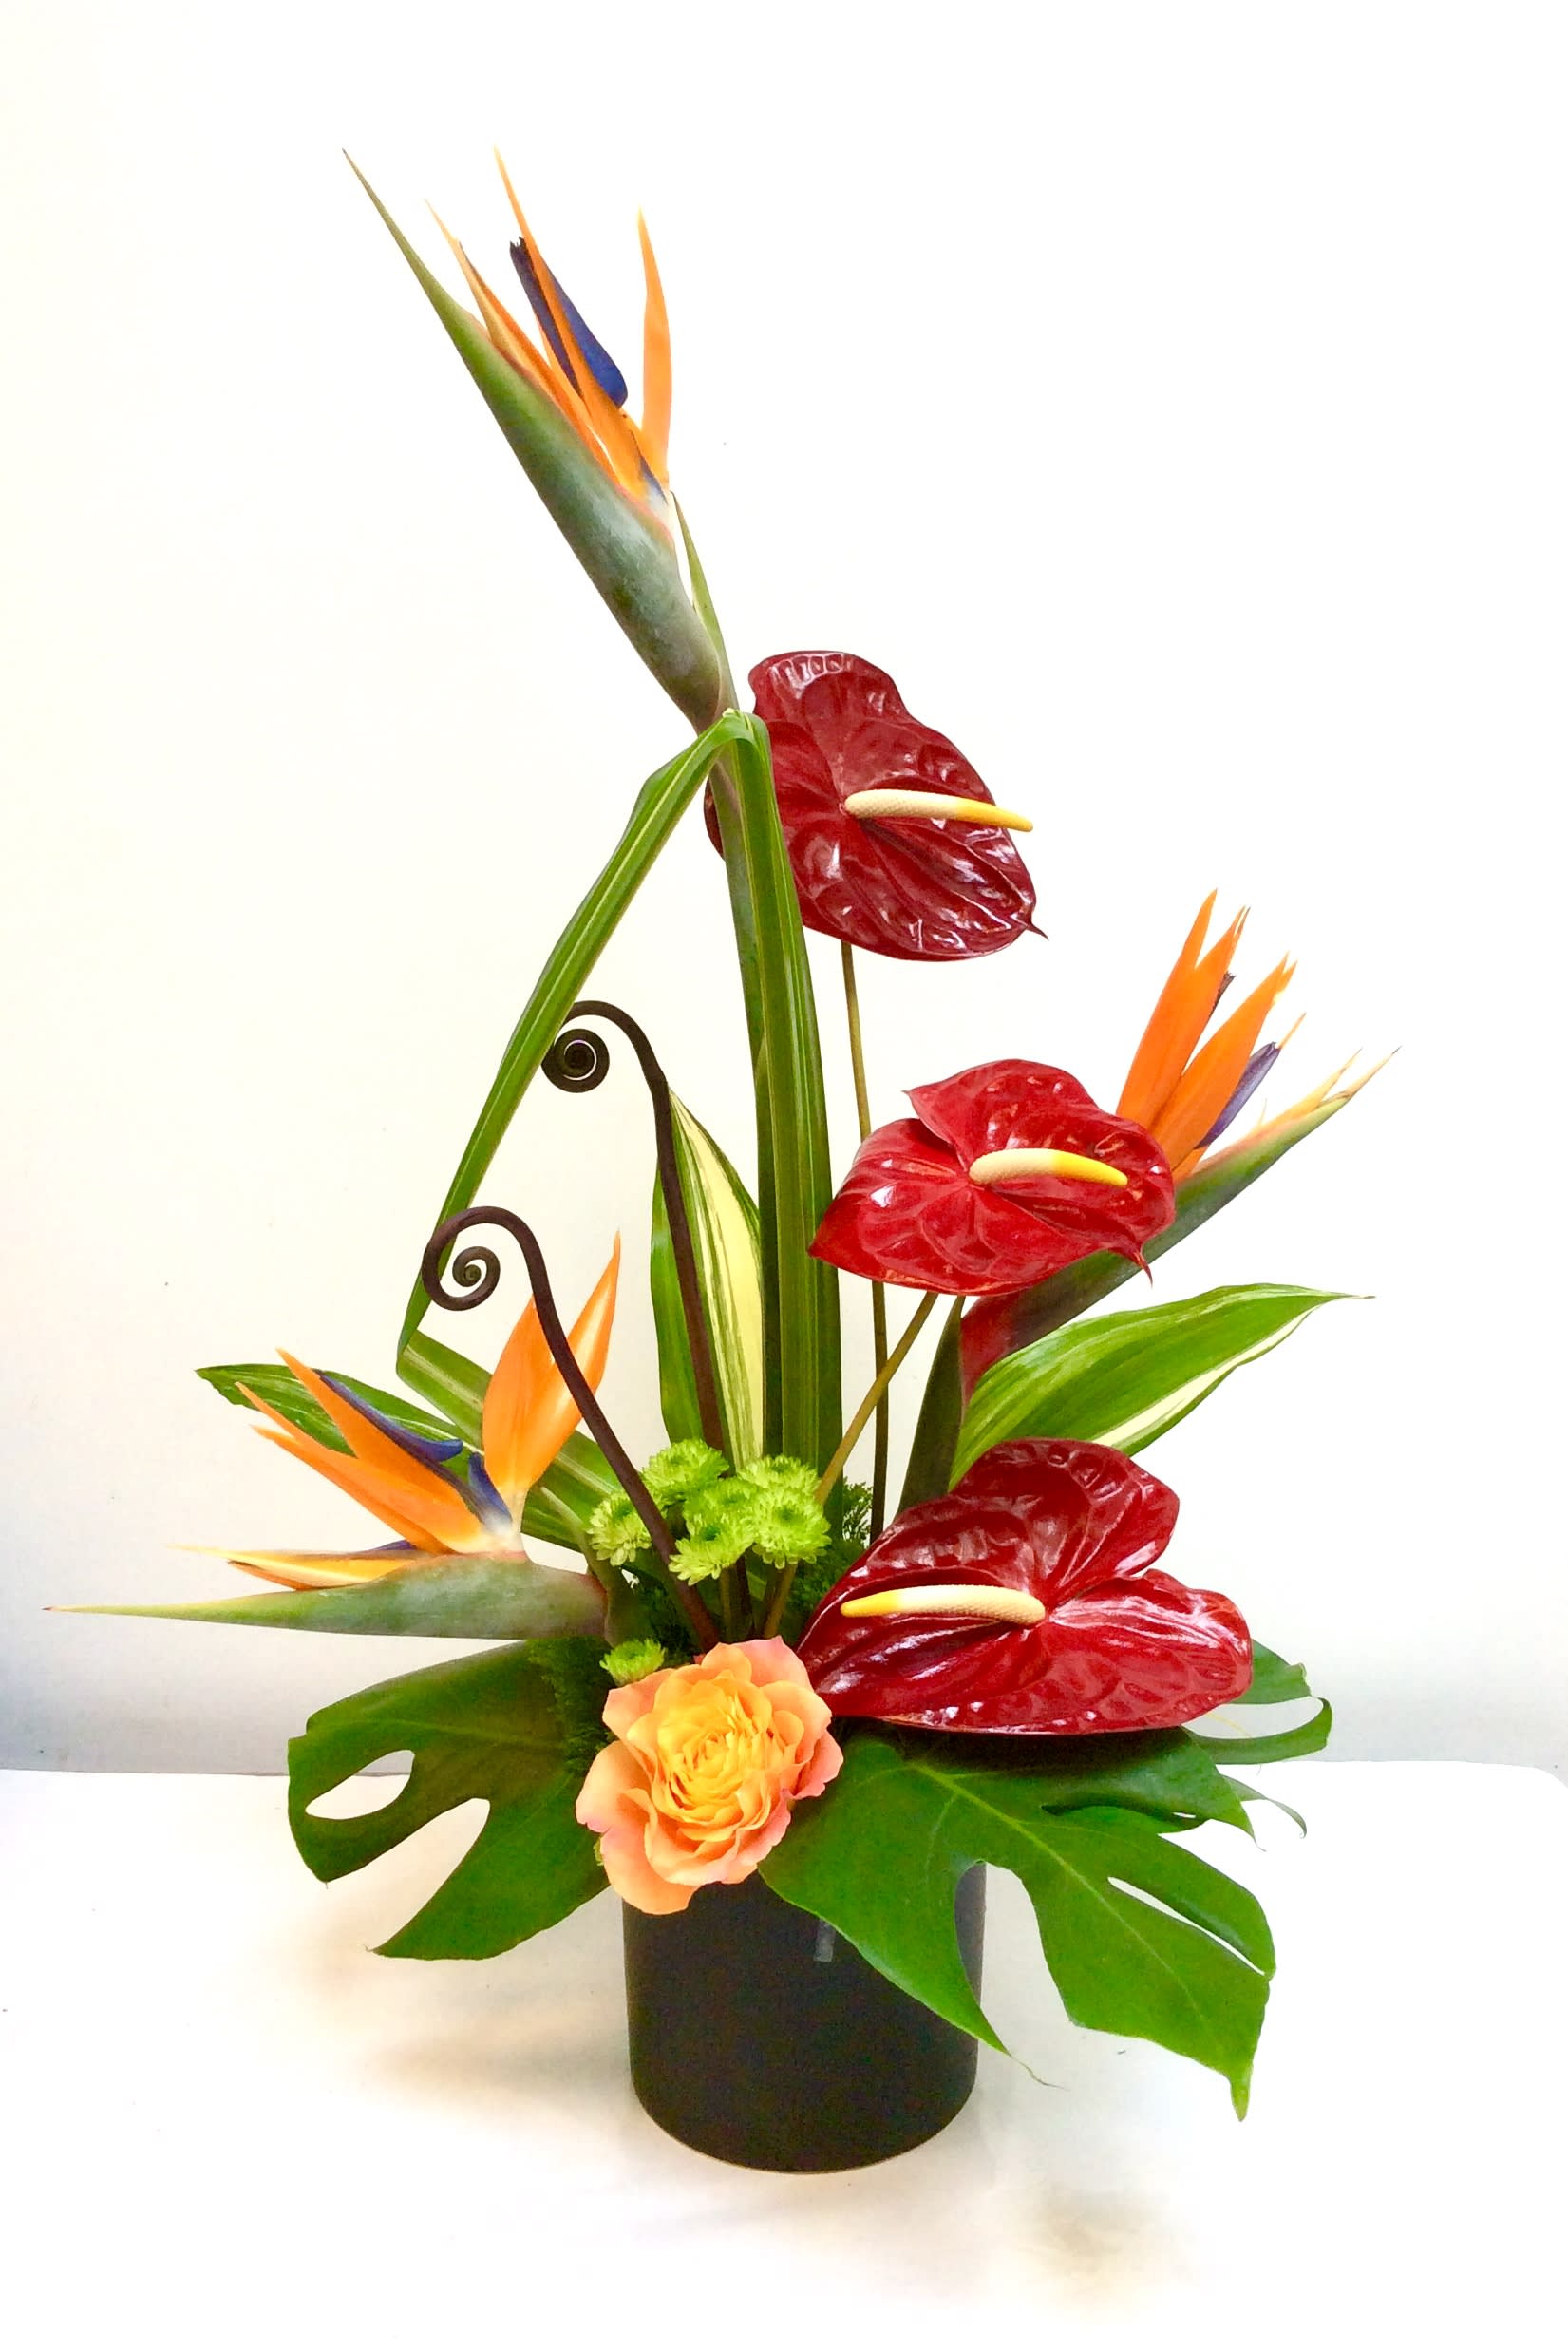 Maui Memories - High style design, geometric shapes showcasing our favorite tropical flowers, birds of paradise, antirrhinum, orchids and more.